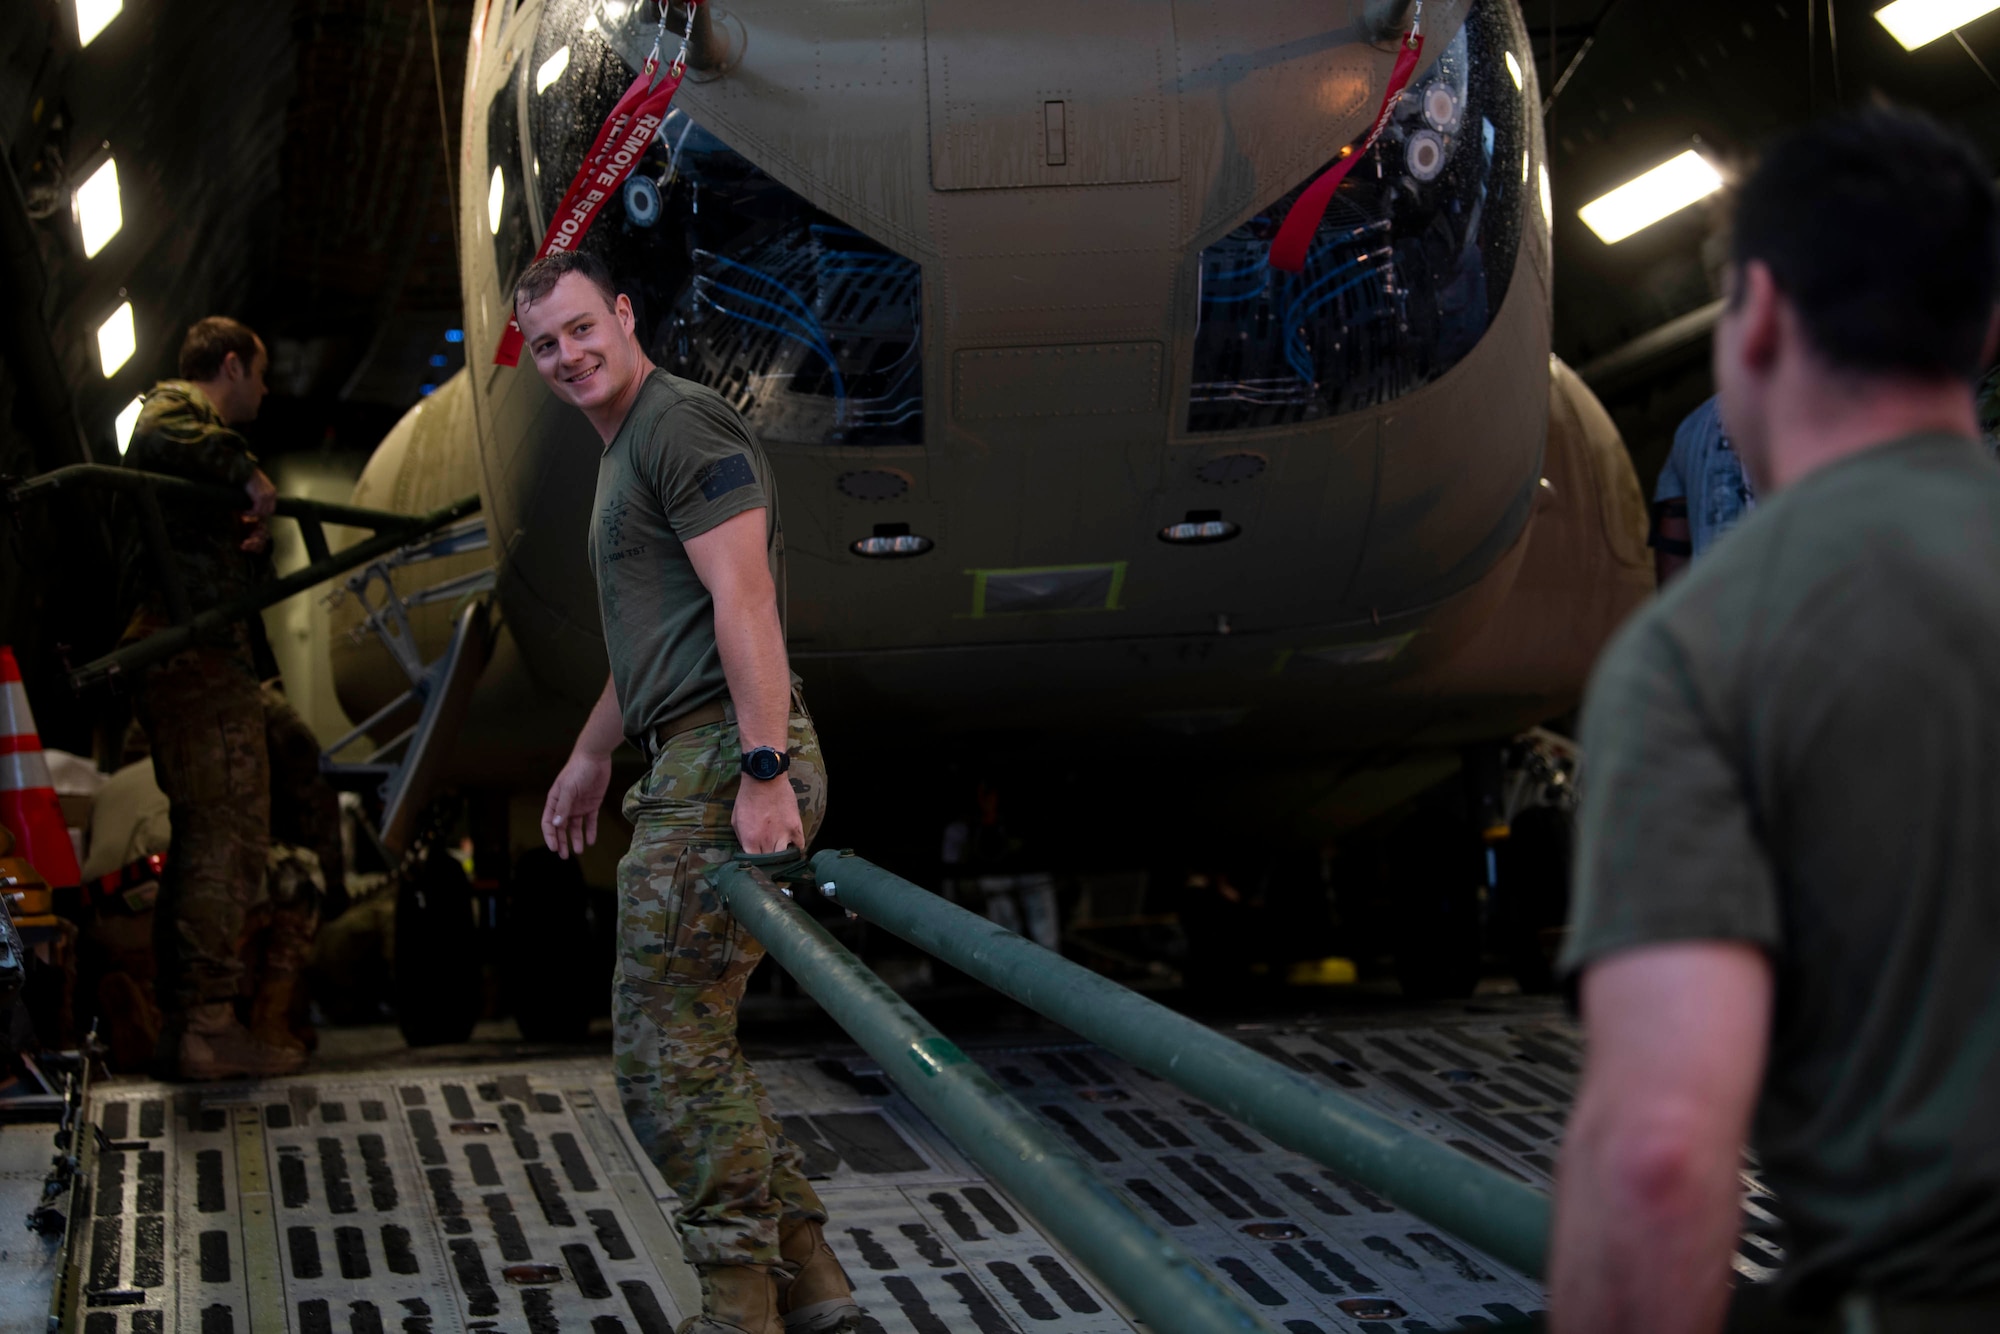 Australian Army soldiers load a CH-47F Chinook helicopter tow bar onto a C-5M Super Galaxy during a foreign military sales mission at Dover Air Force Base, Delaware, June 16, 2022. The U.S. and Australia maintain a robust relationship that serves as an anchor for peace and stability in the Indo-Pacific region and around the world. Due to its strategic location, Dover AFB supports approximately $3.5 billion worth of foreign military sales annually. (U.S. Air Force photo by Tech. Sgt. J.D. Strong II)